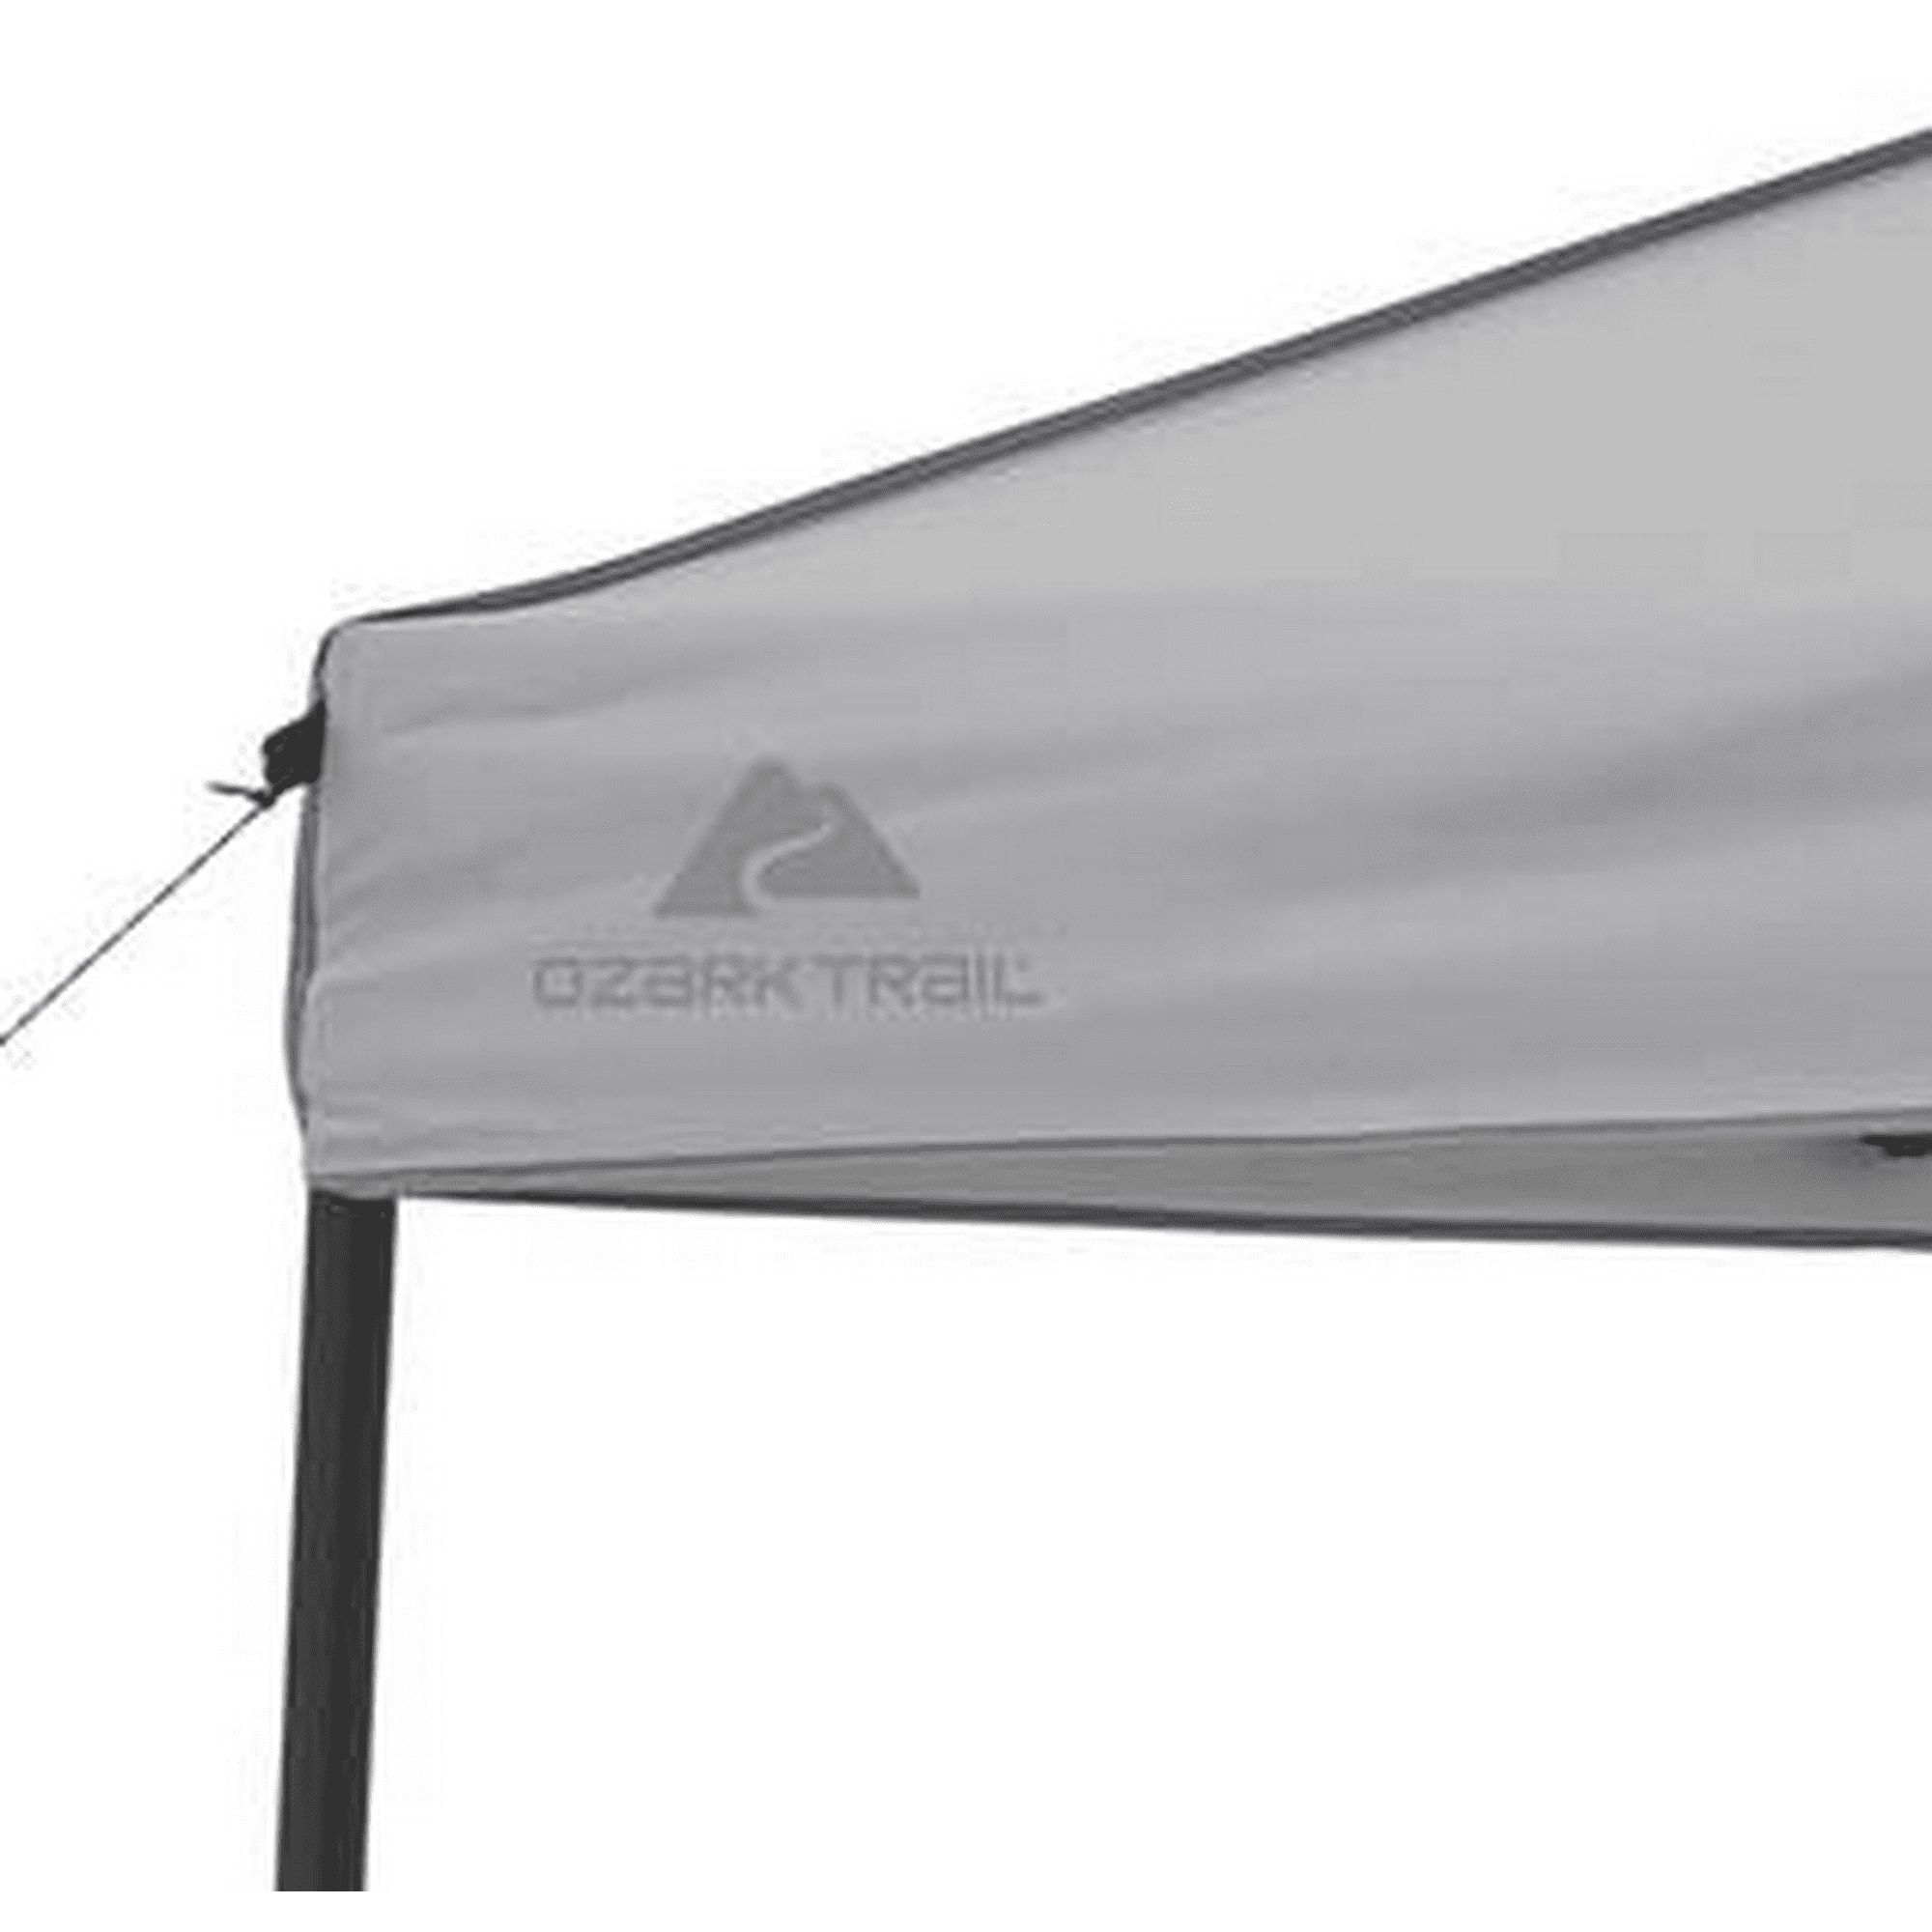 Ozark Trail 8' x 10' Gray Instant Outdoor Canopy